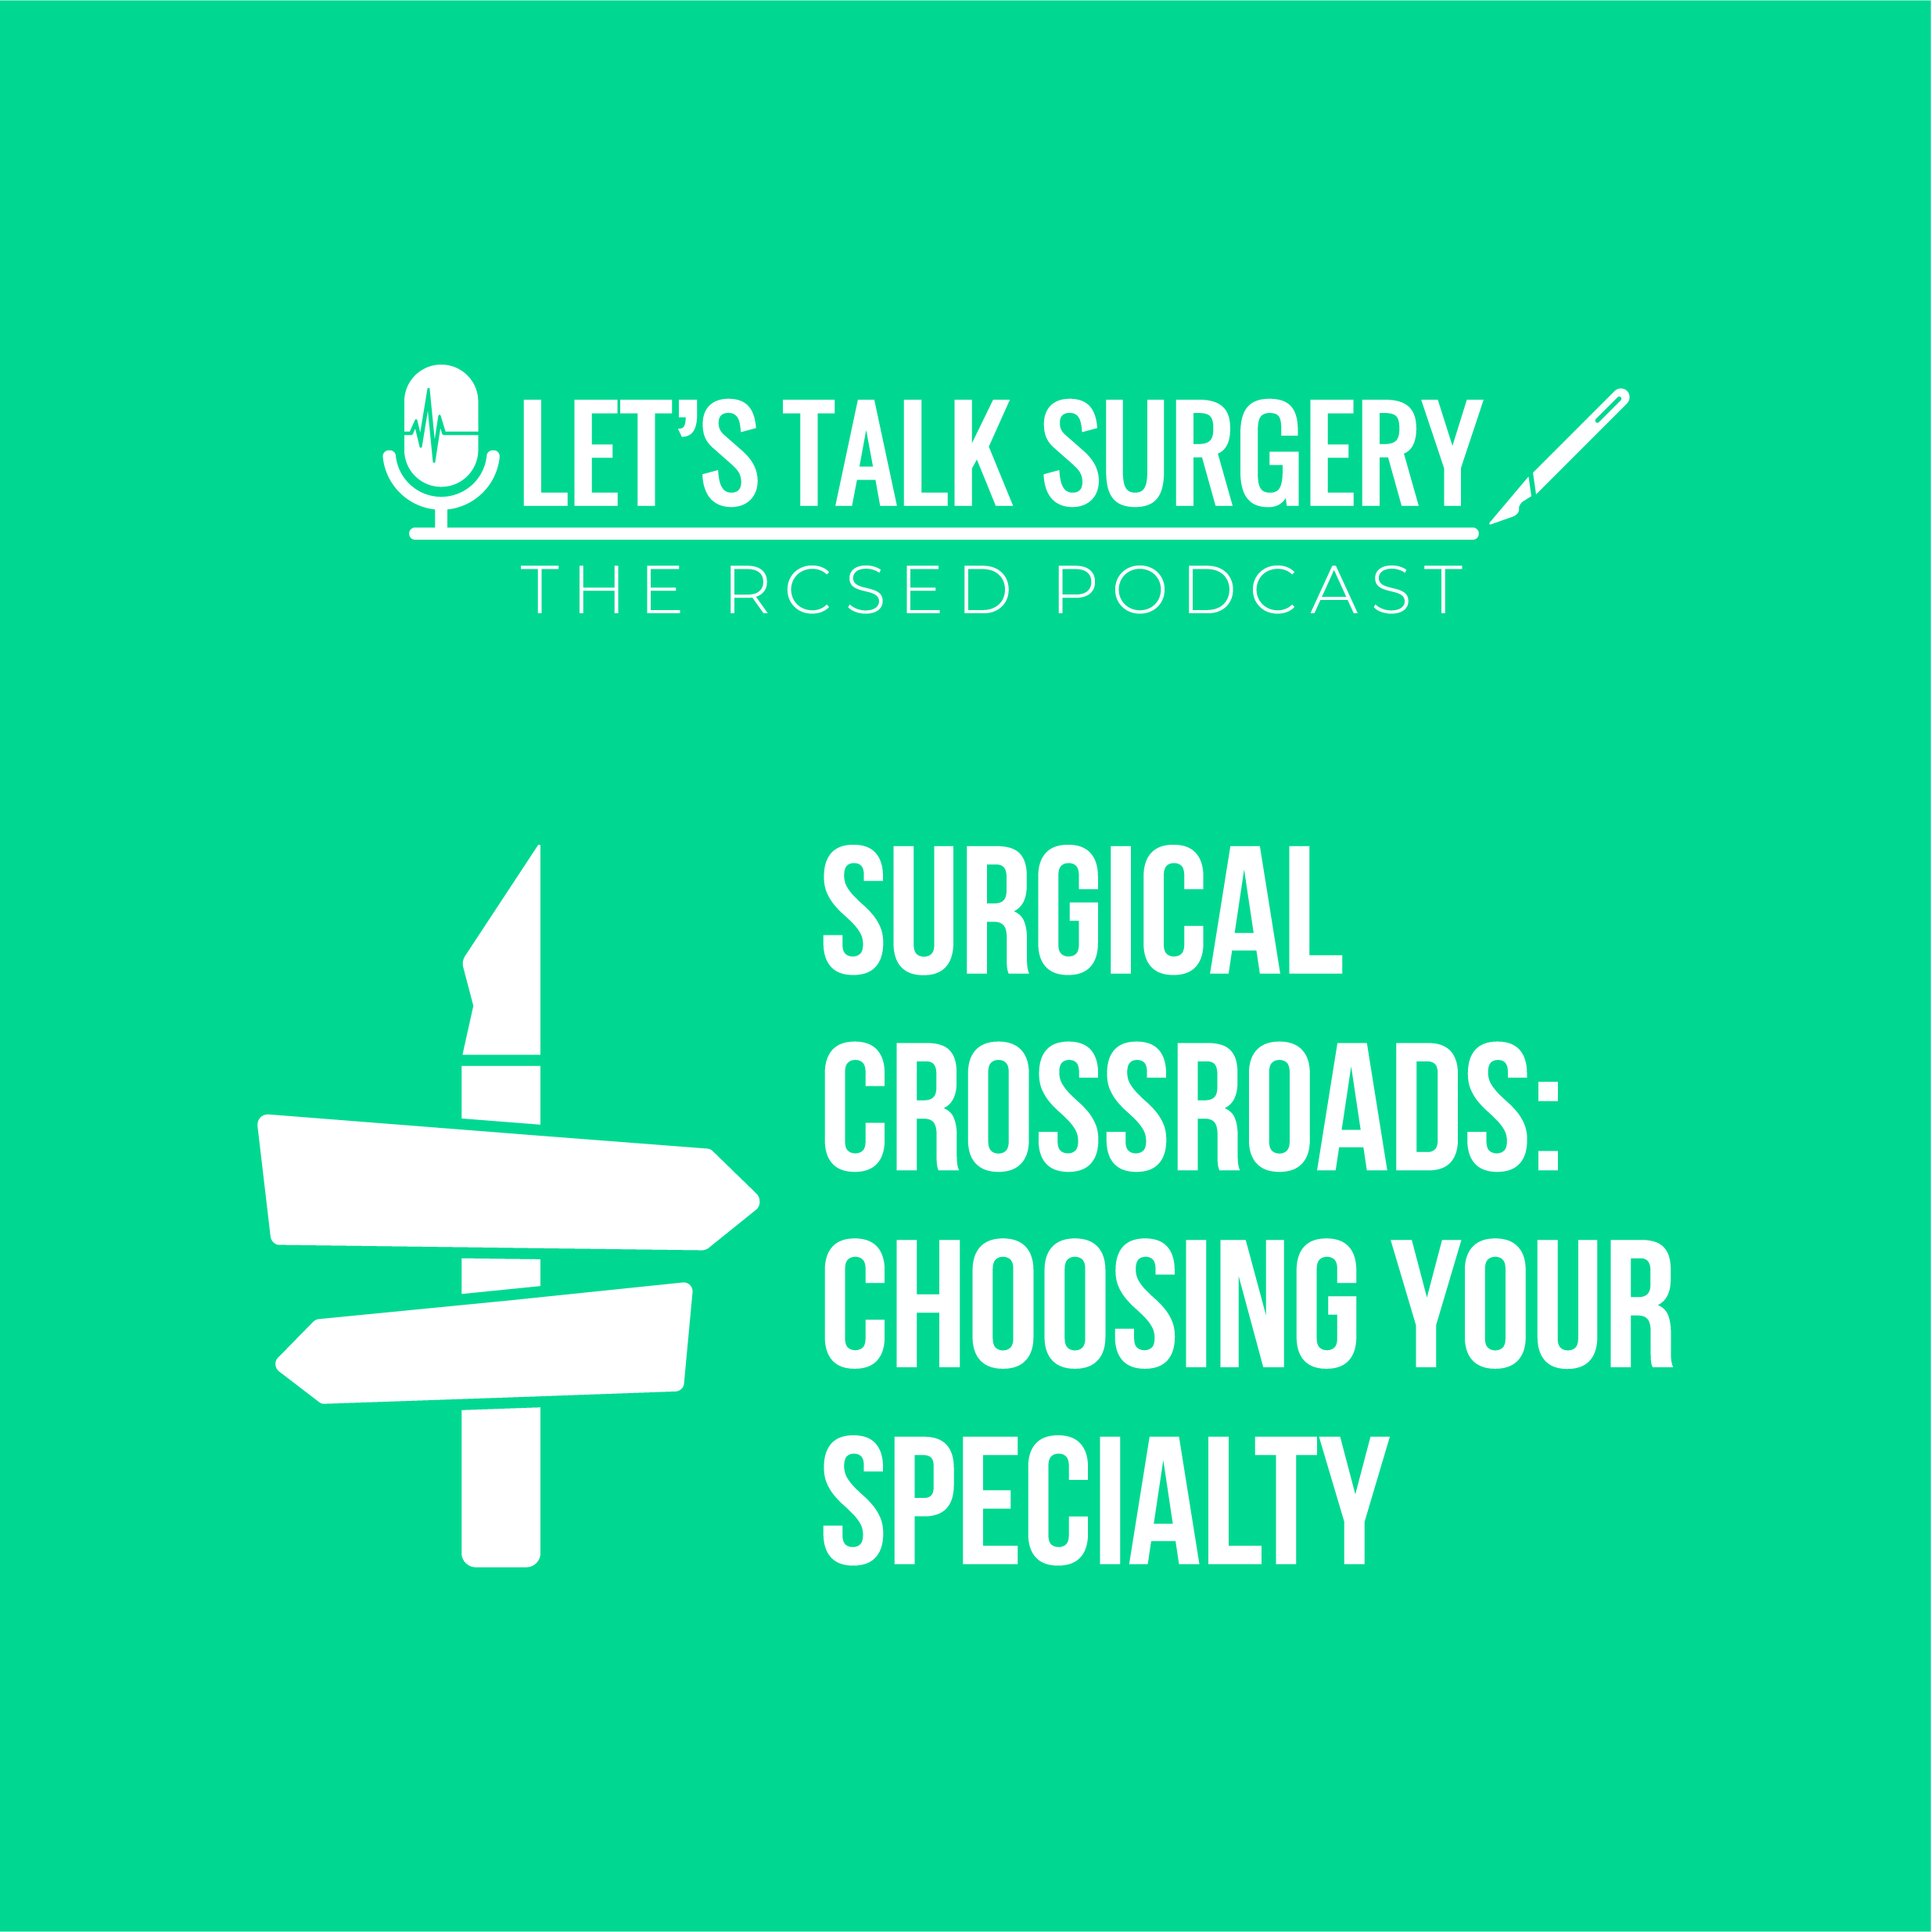 Let's Talk Surgery Podcast, Surgical Crossroads: Choosing your specialty - "The Rural Episode"